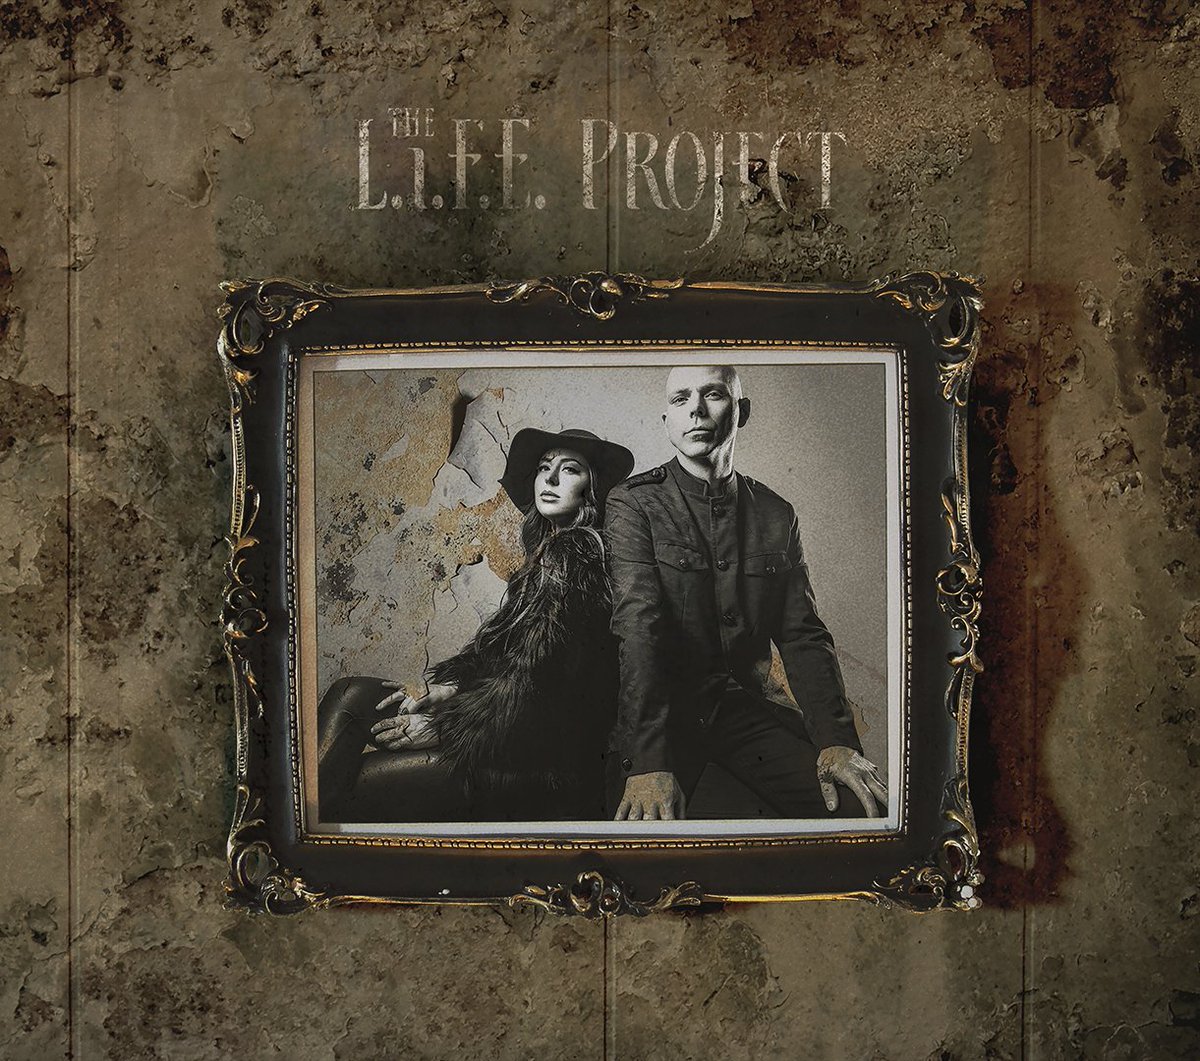 Front cover for @LifeProjectBand 
(Josh Rand (#StoneSour) and Cassandra Carson) EP
Photography, Mac
Art Direction: Rand
Band Photography: McAvaddy
2021 Cover Zero

#TheLIFEProject #JoshRand #CassandraCarson #EP #Photography #Design #Logo #Illustration #AlbumCover #Portrait